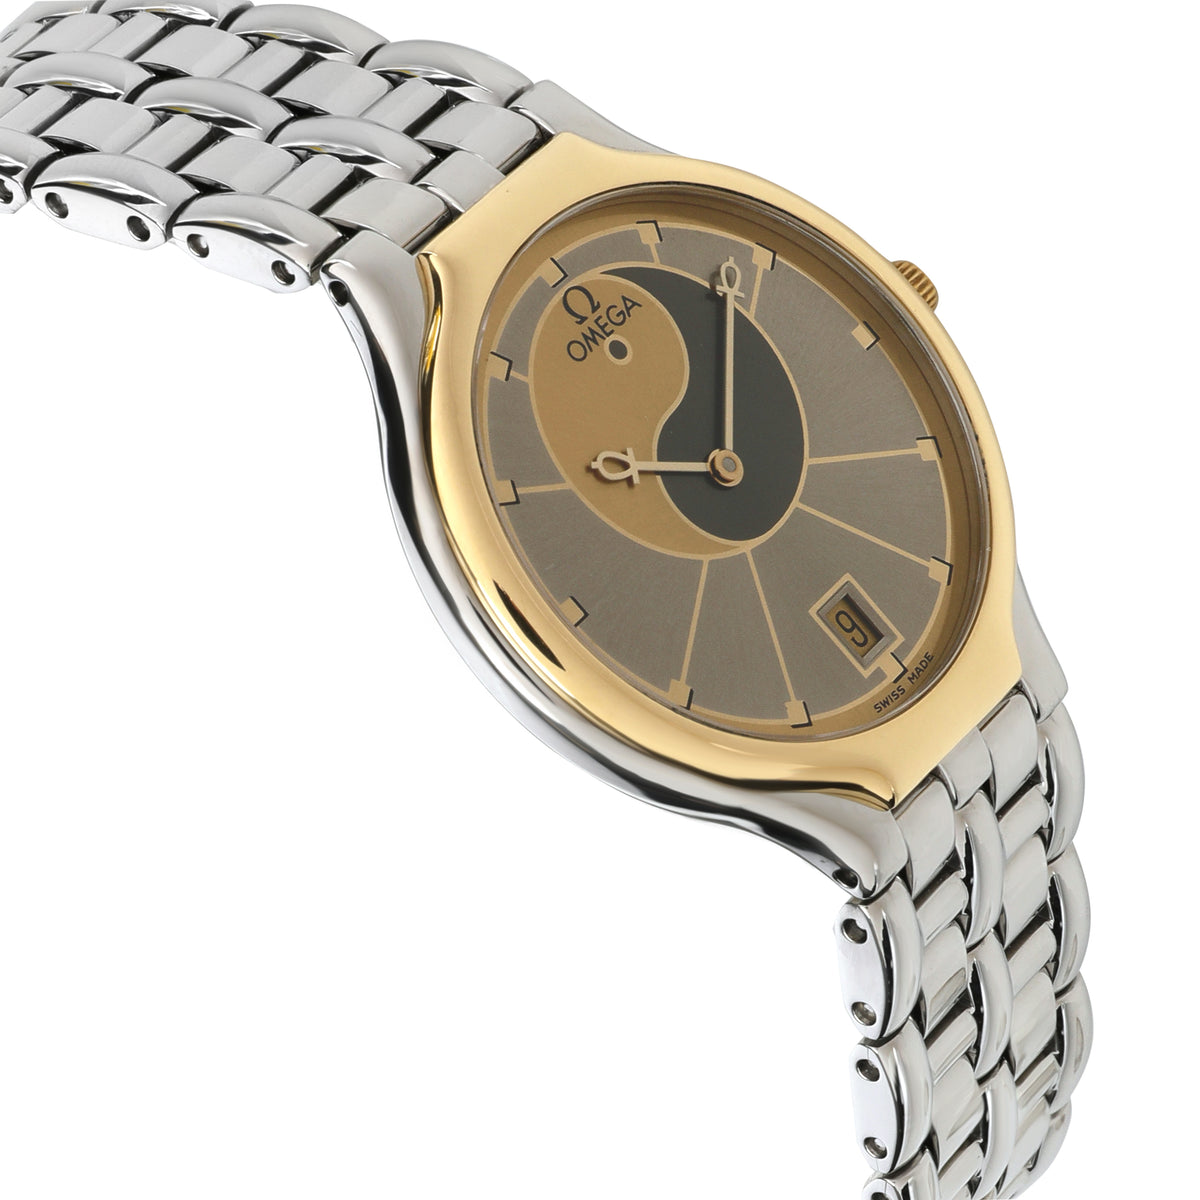 Omega Symbol 196.0316 Unisex Watch in  Stainless Steel and Yellow Gold